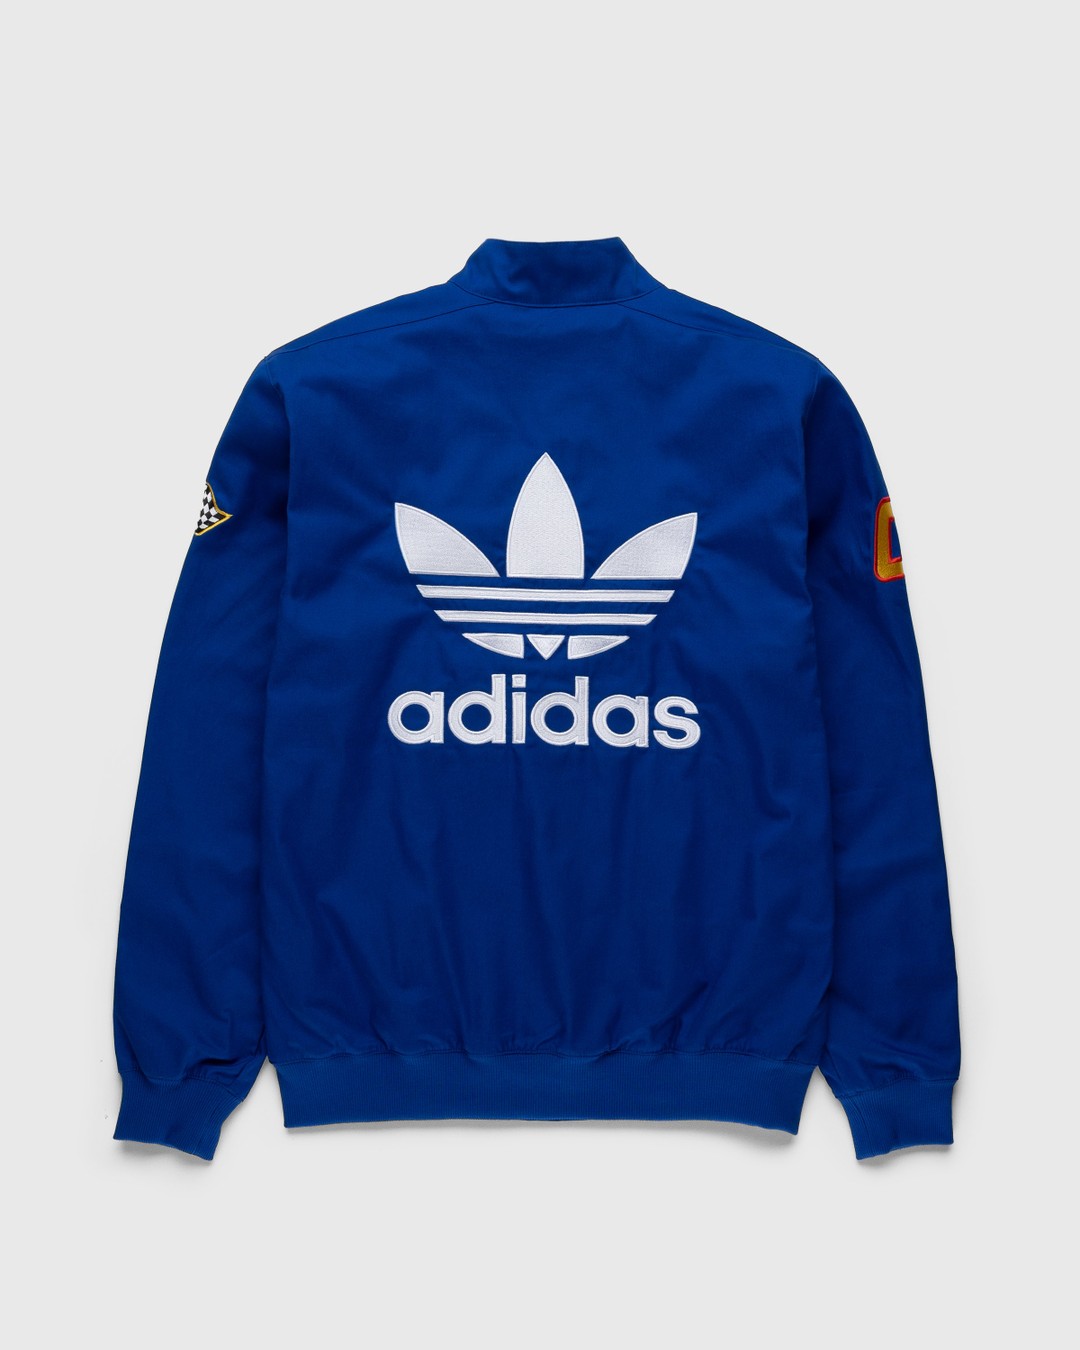 Adidas – Sean Wotherspoon x Hot Wheels Race Jacket Blue - Jackets - Blue - Image 2